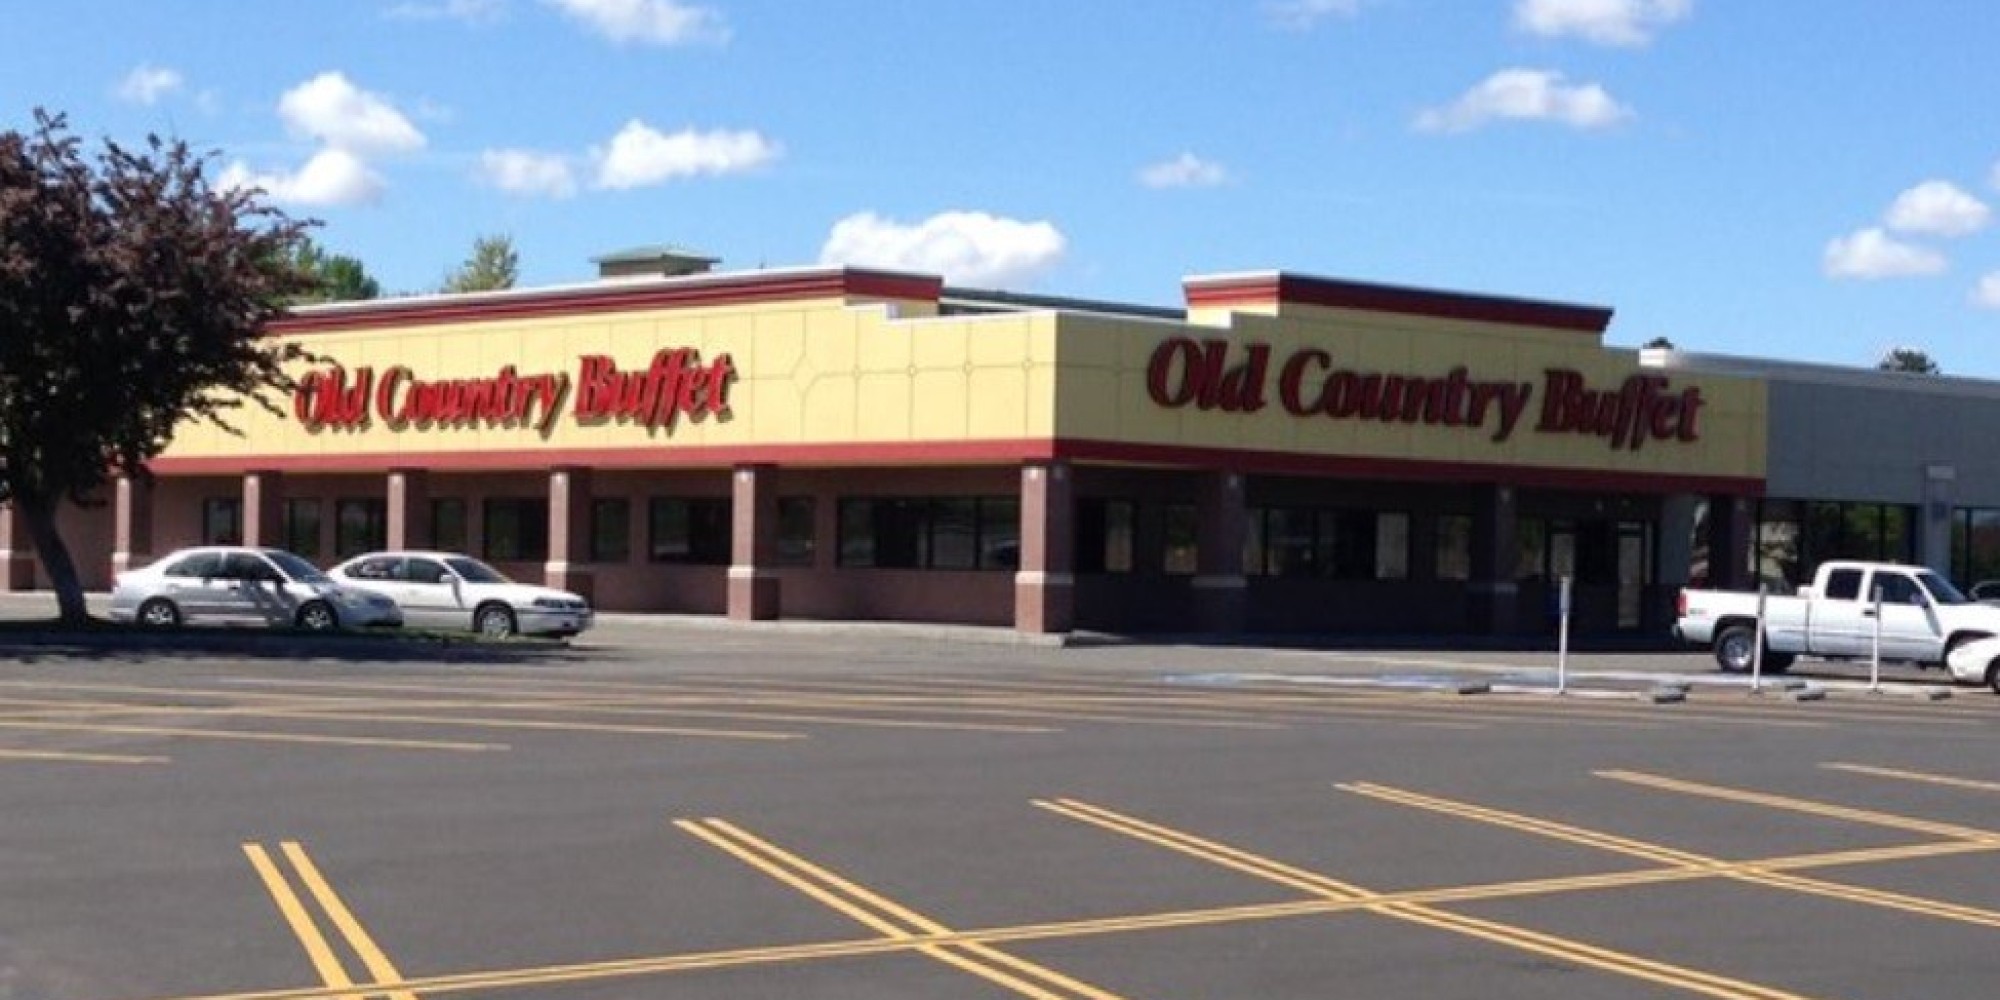 Old country buffet ford city chicago #5